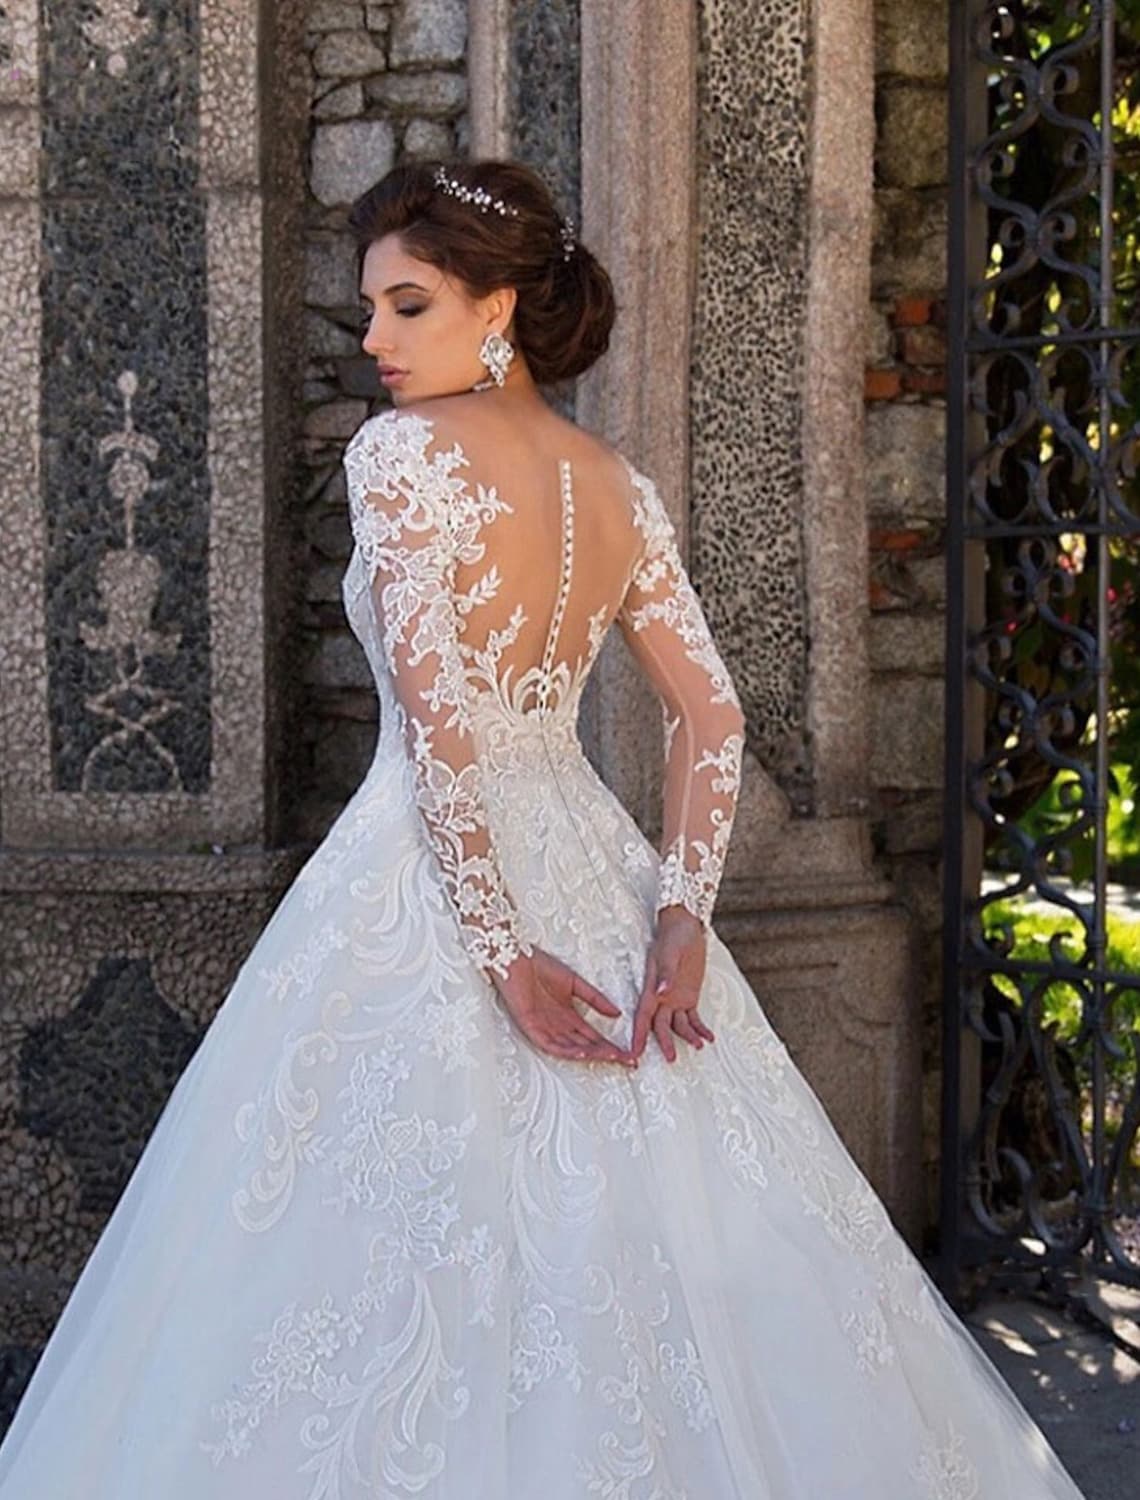 Engagement Formal Wedding Dresses Ball Gown Long Sleeve Lace Appliques